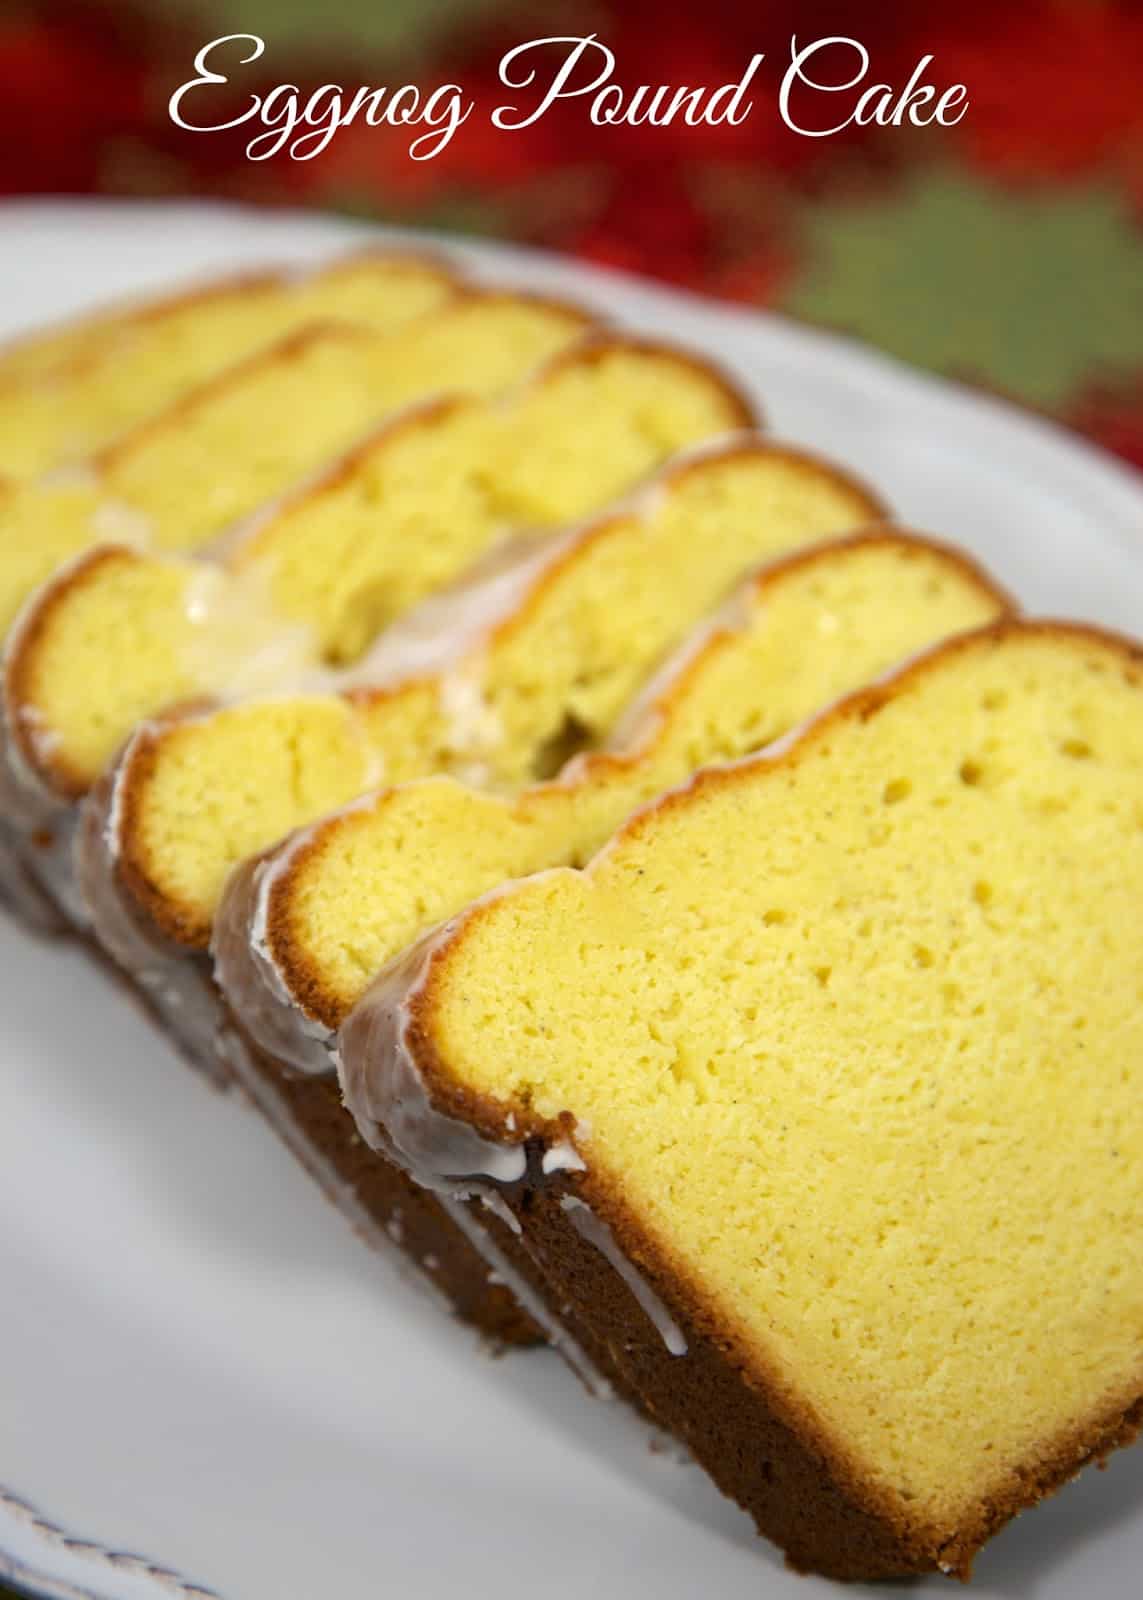 Eggnog Pound Cake - even eggnog haters will love this cake! Can make ahead of time and freeze unglazed for later. Served this at a Christmas party and everyone RAVED about it! Even eggnog haters!! Makes a great homemade holiday gift. We love this eggnog pound cake recipe!